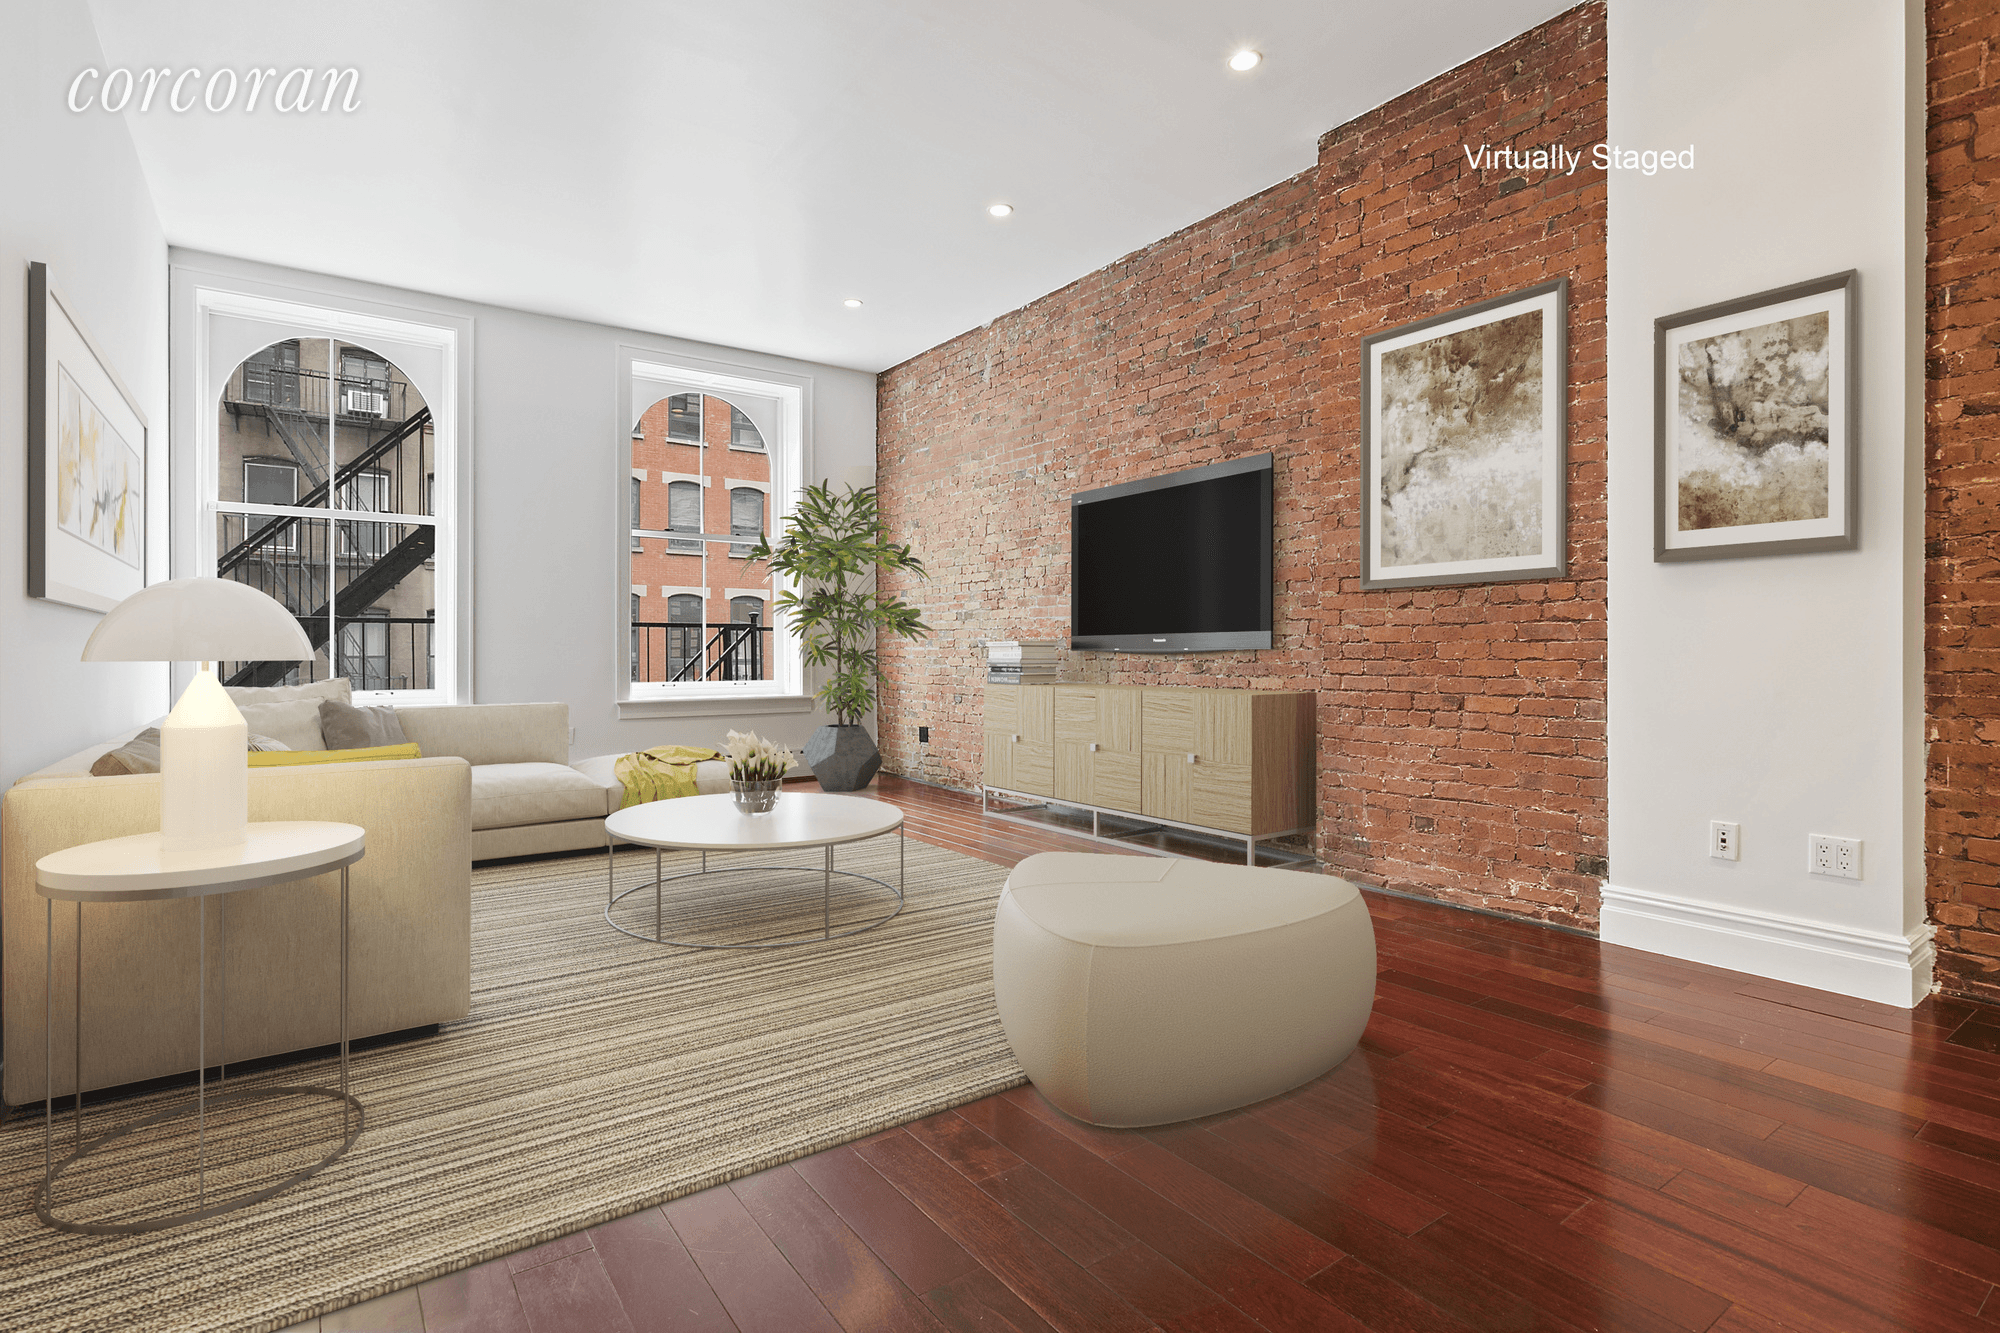 A classic, fully furnished TriBeCa loft featuring 1, 800 square foot and luxury finishes in prime TriBeCa !